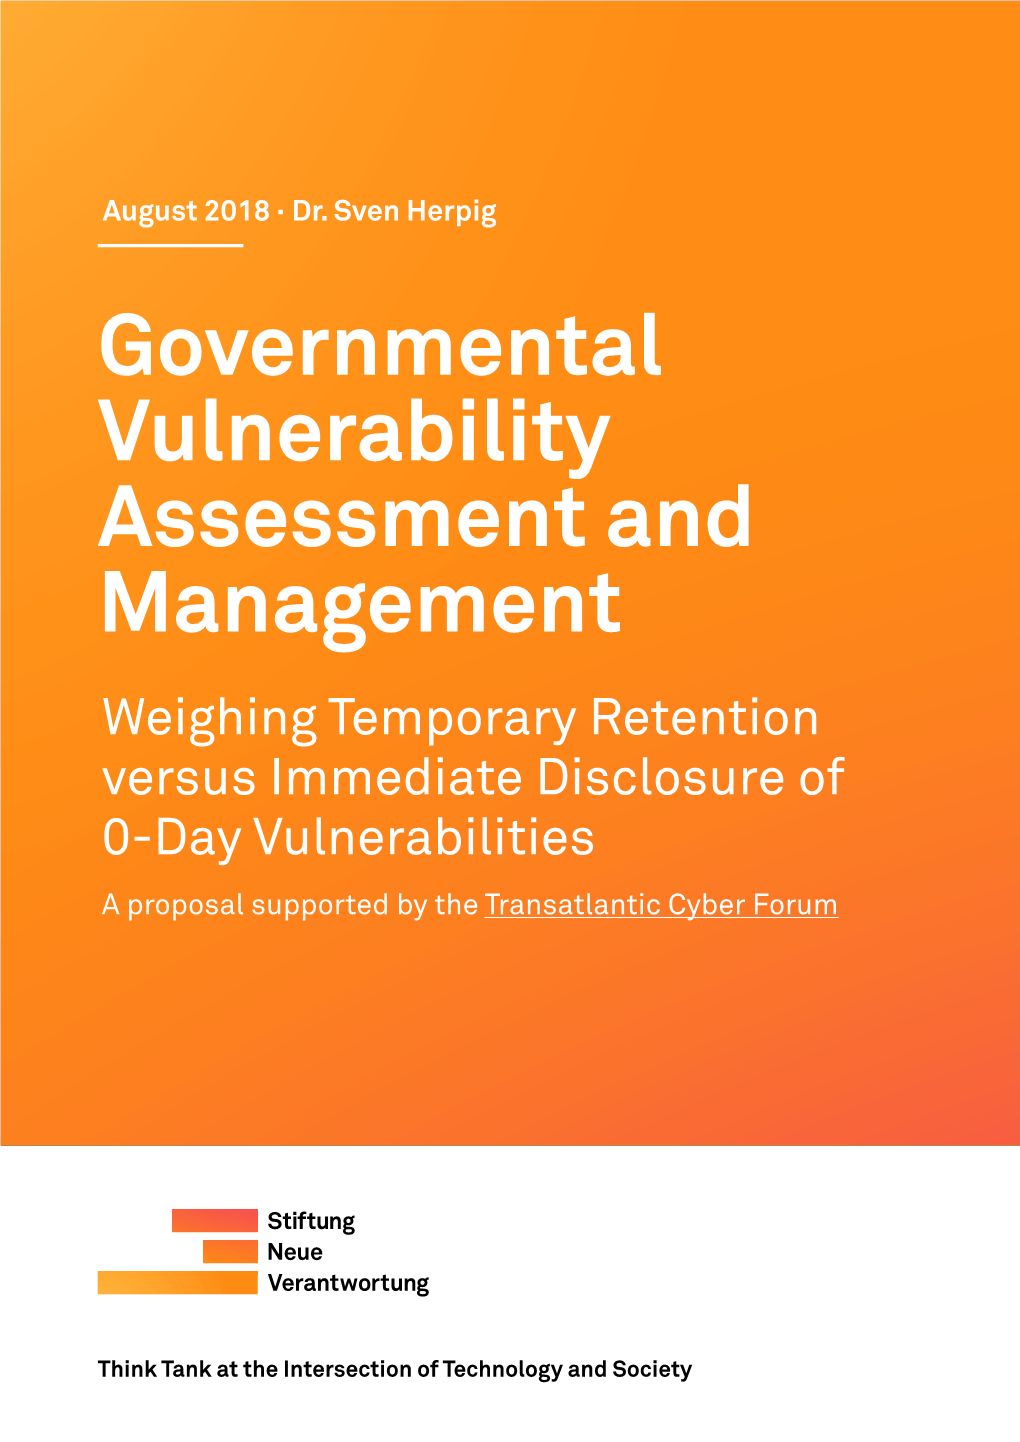 Paper on Government Vulnerability Assessment and Management